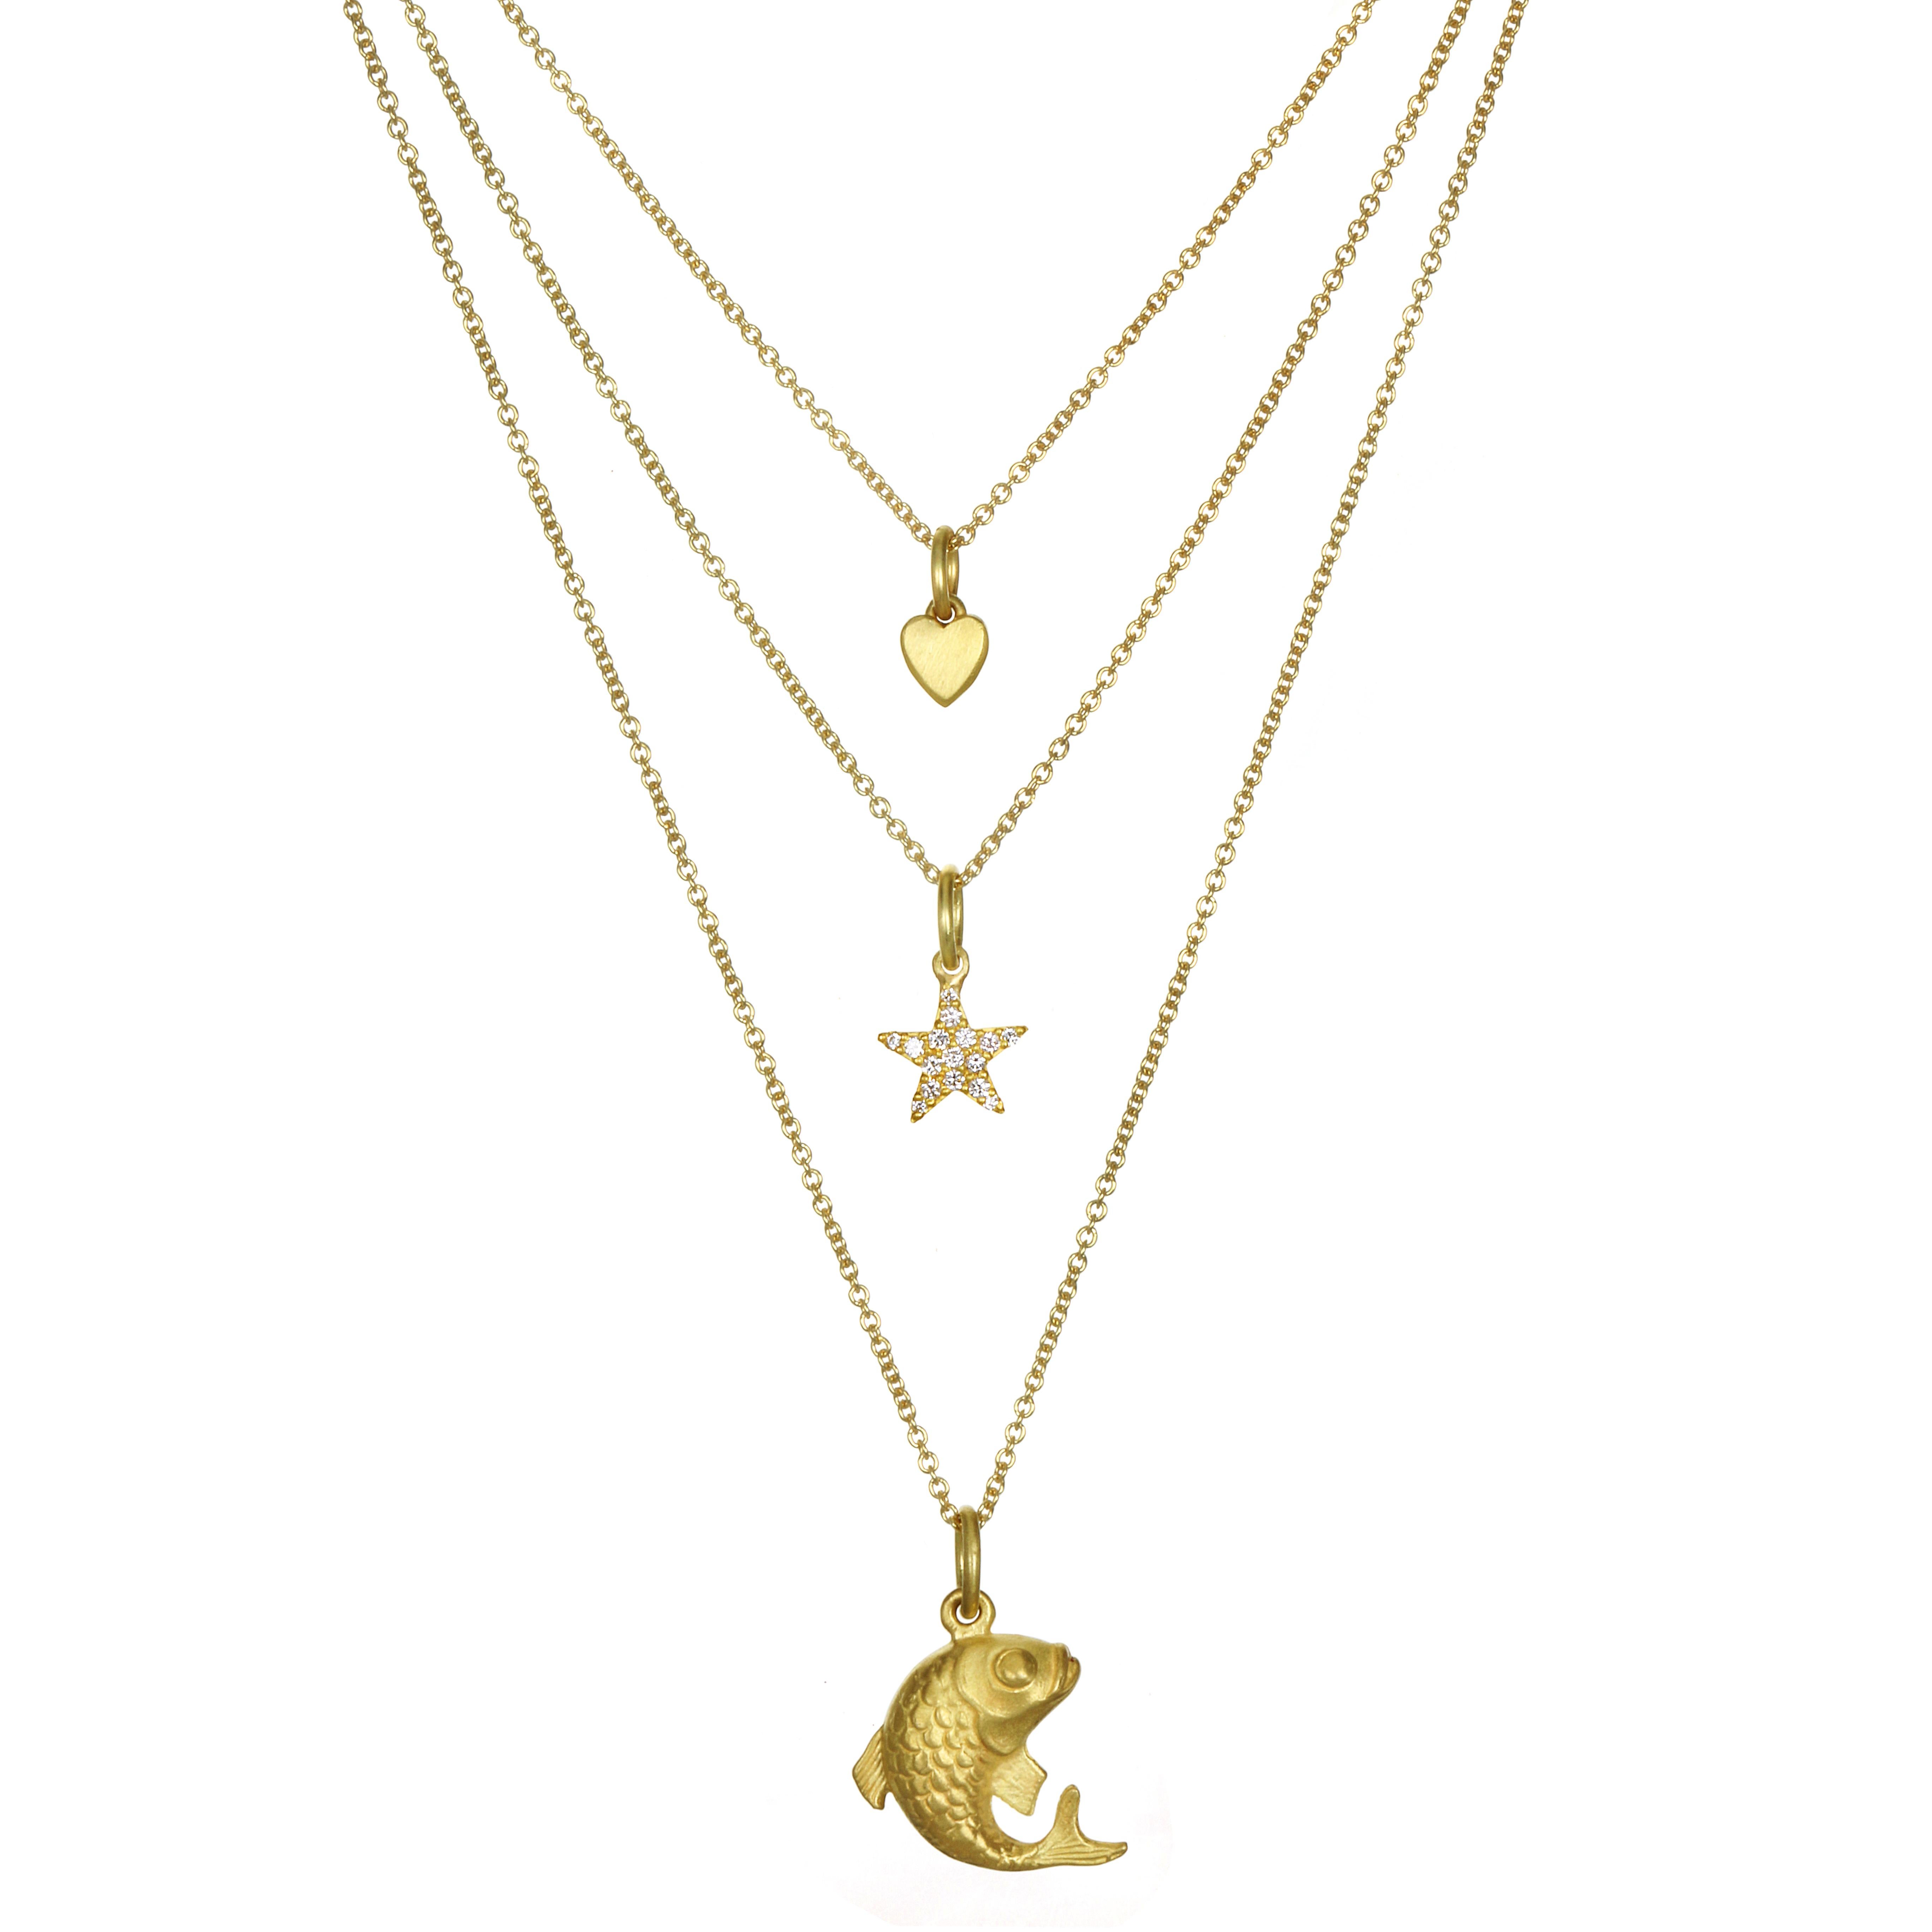 For courage, achievement, and strength - This beautiful Koi Charm is crafted in 18K green gold.  The cable chain is 16-18